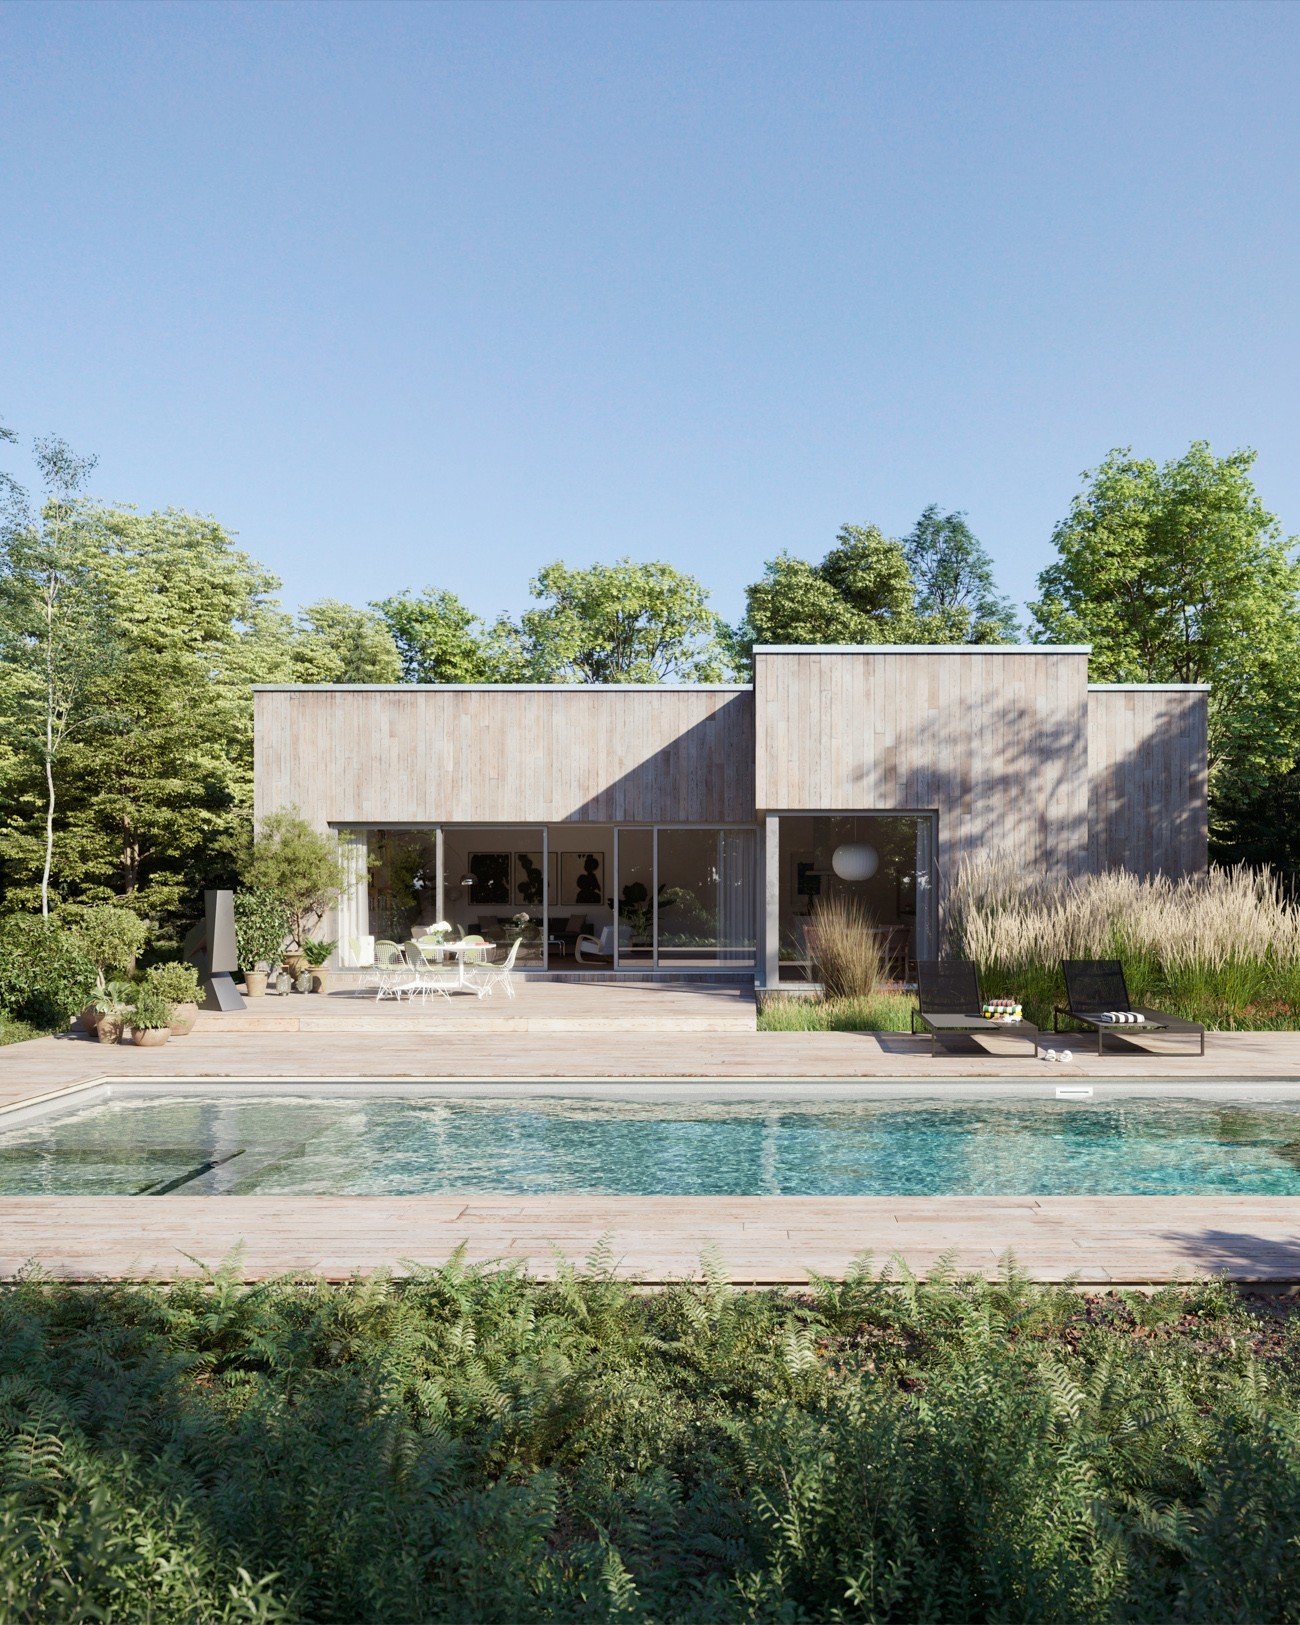 From day to night, the story of a luscious retreat in the heart of the Hamptons, featuring @lathampool Fiberglass, Astoria. ⁠
⁠
Fully 3D rendering created by our team! ⁠
⁠
Rendering: @recentspaces⁠
Clients: @standardissuedesign and @lathampool